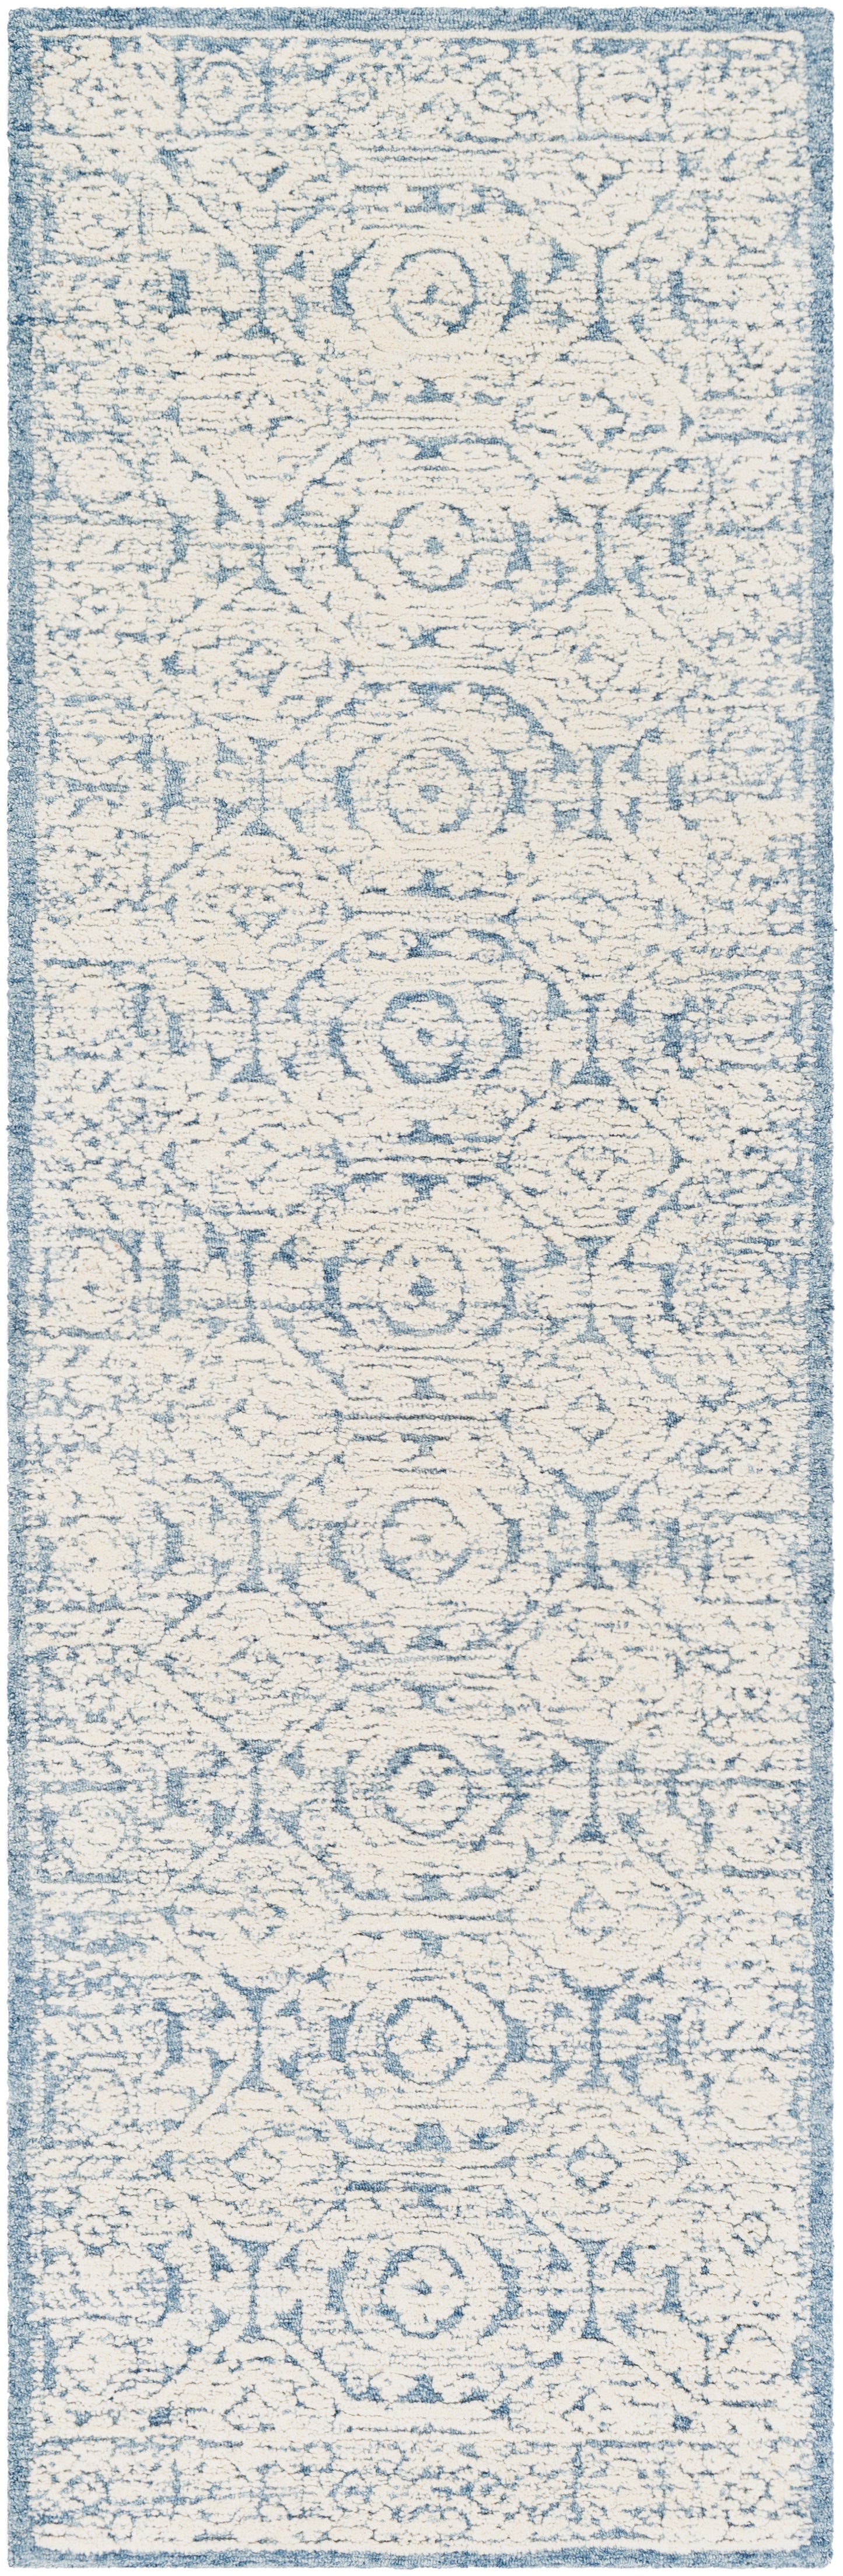 Louvre 23814 Hand Tufted Wool Indoor Area Rug by Surya Rugs